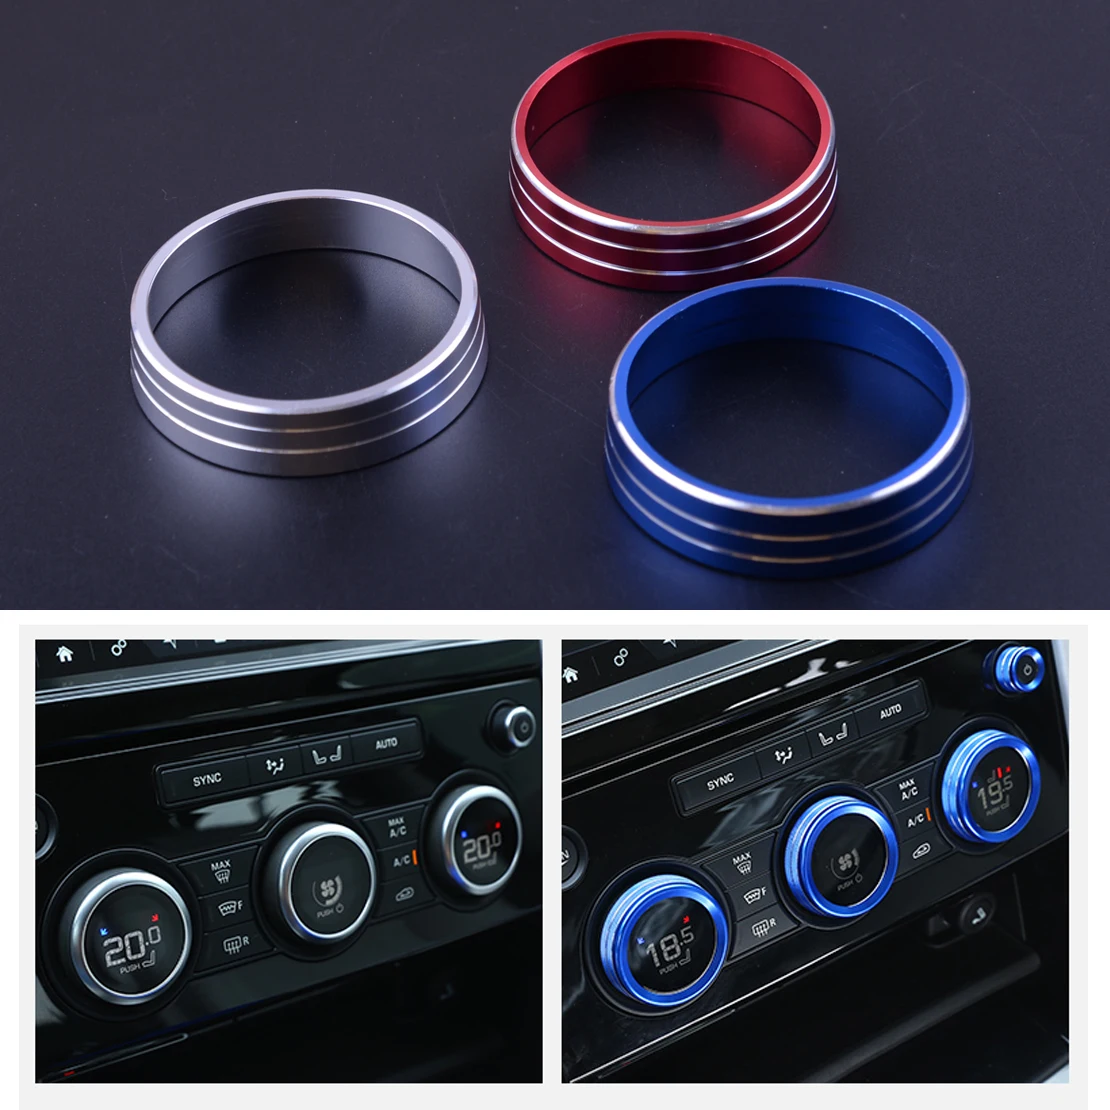 CITALL 3pcs A/C Heater Climate Control Switch Buttons Knobs Cover Trim Ring Fit For Mitsubishi Lancer Outlander